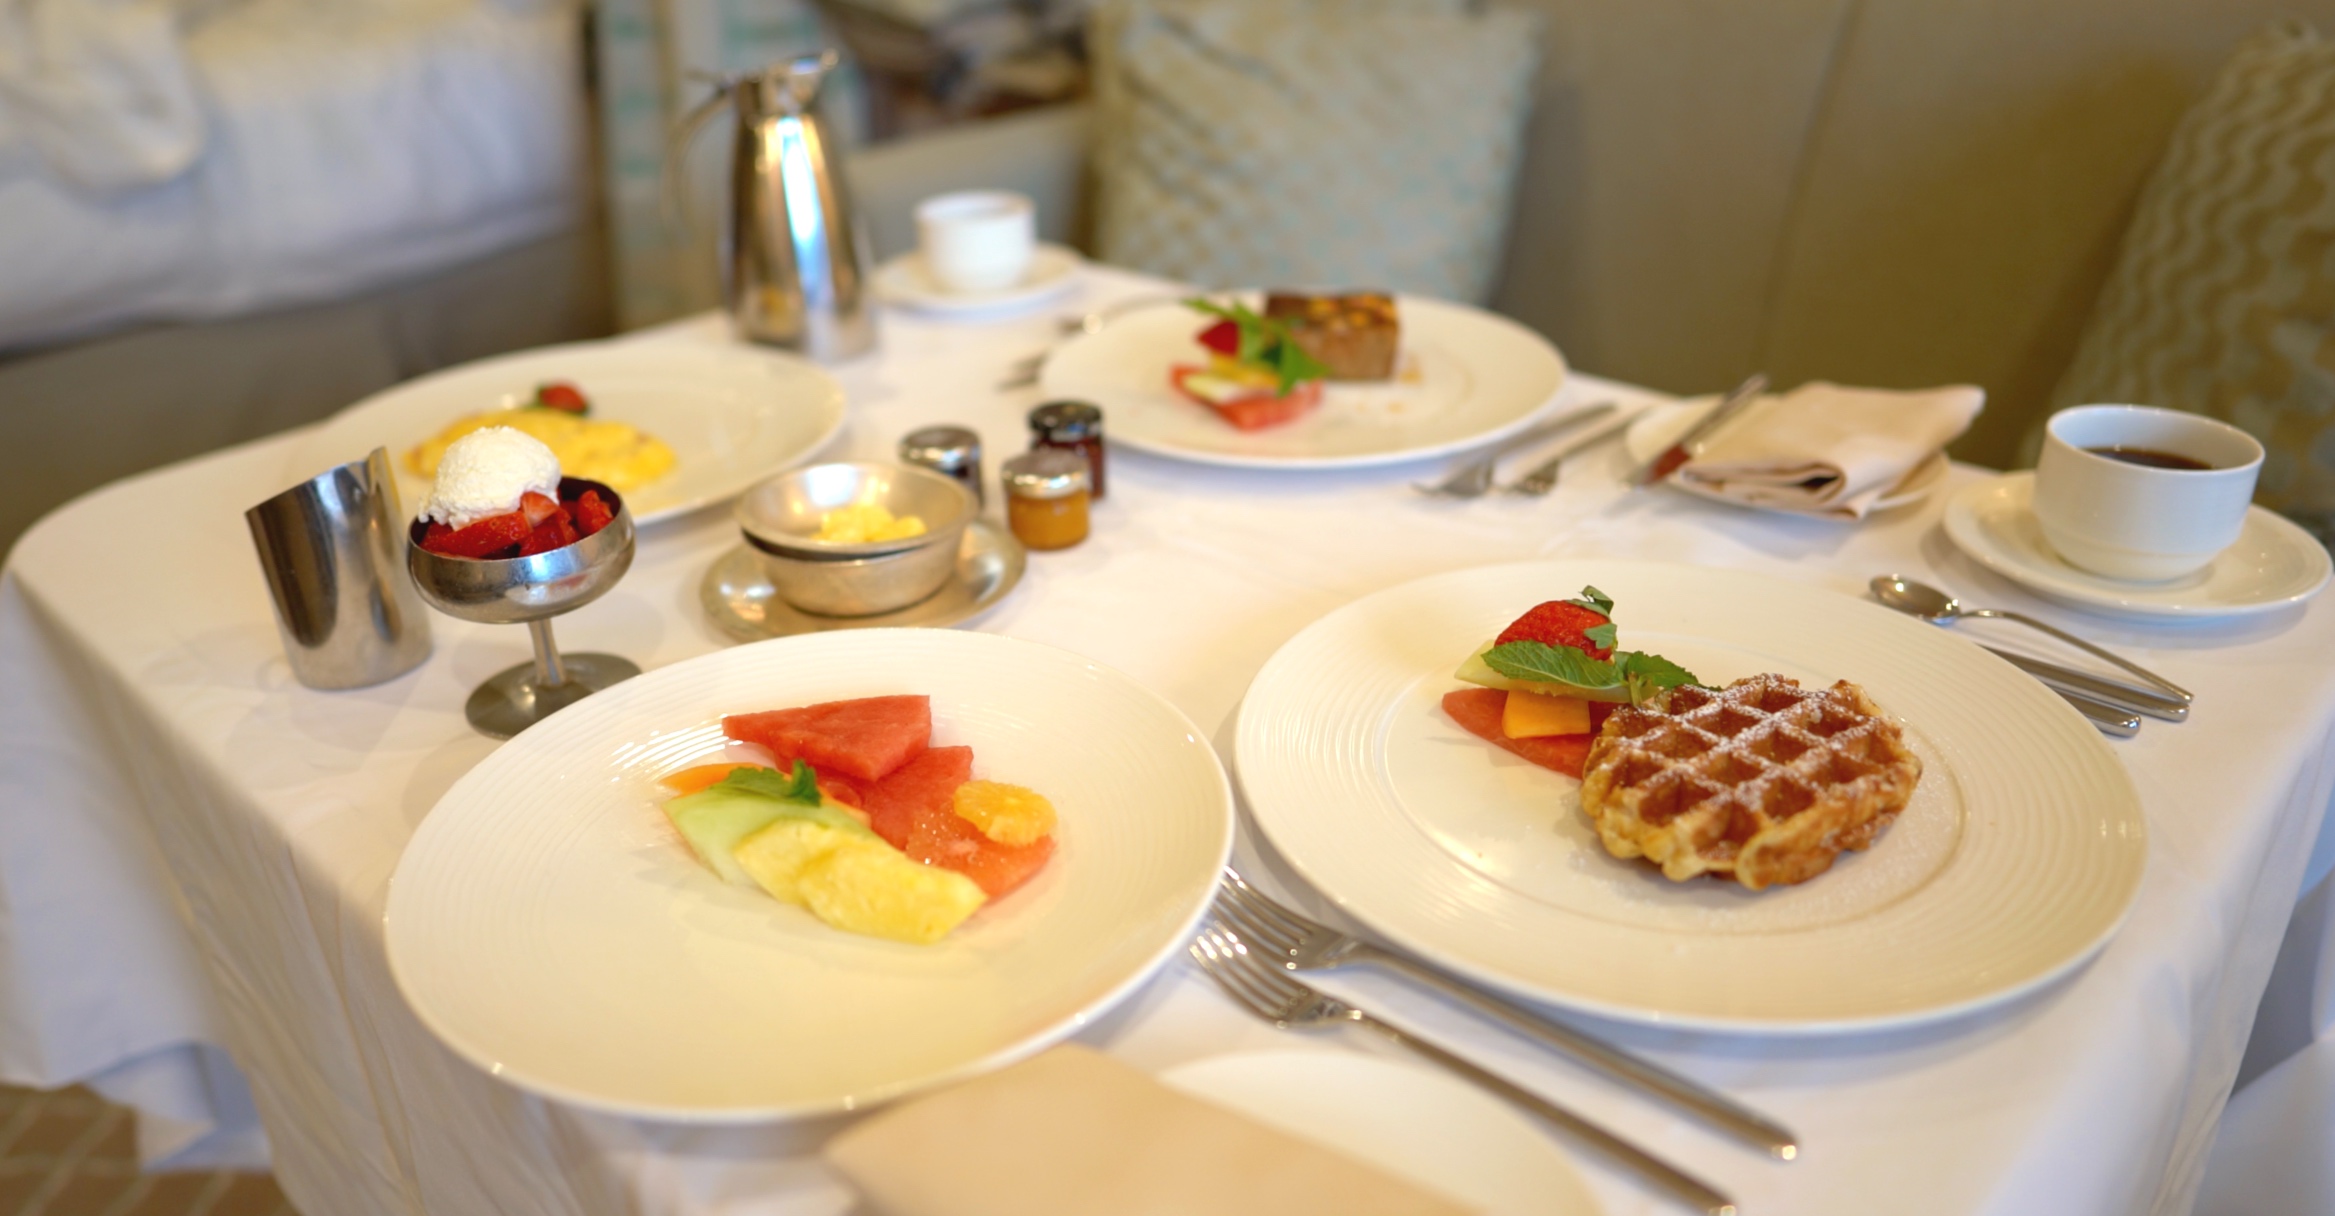 Our delicious in-suite breakfast.